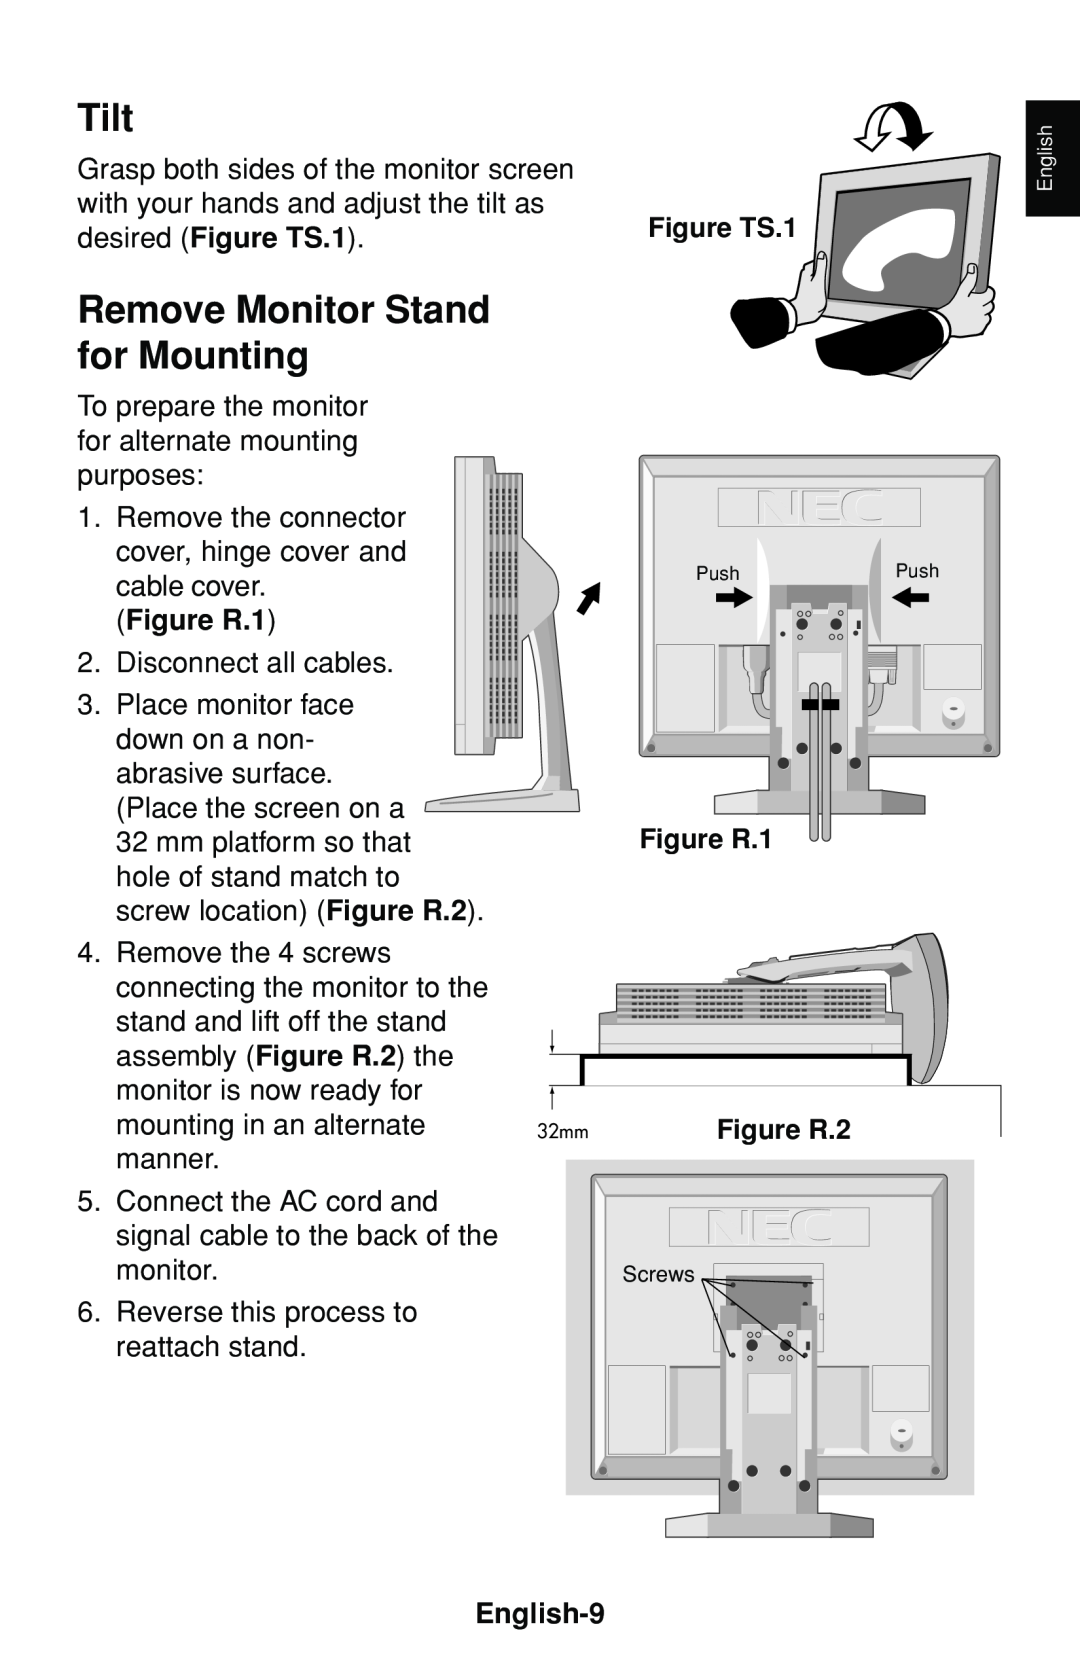 NEC LCD1530V user manual Tilt, Remove Monitor Stand, for Mounting, Figure R.1, English-9 